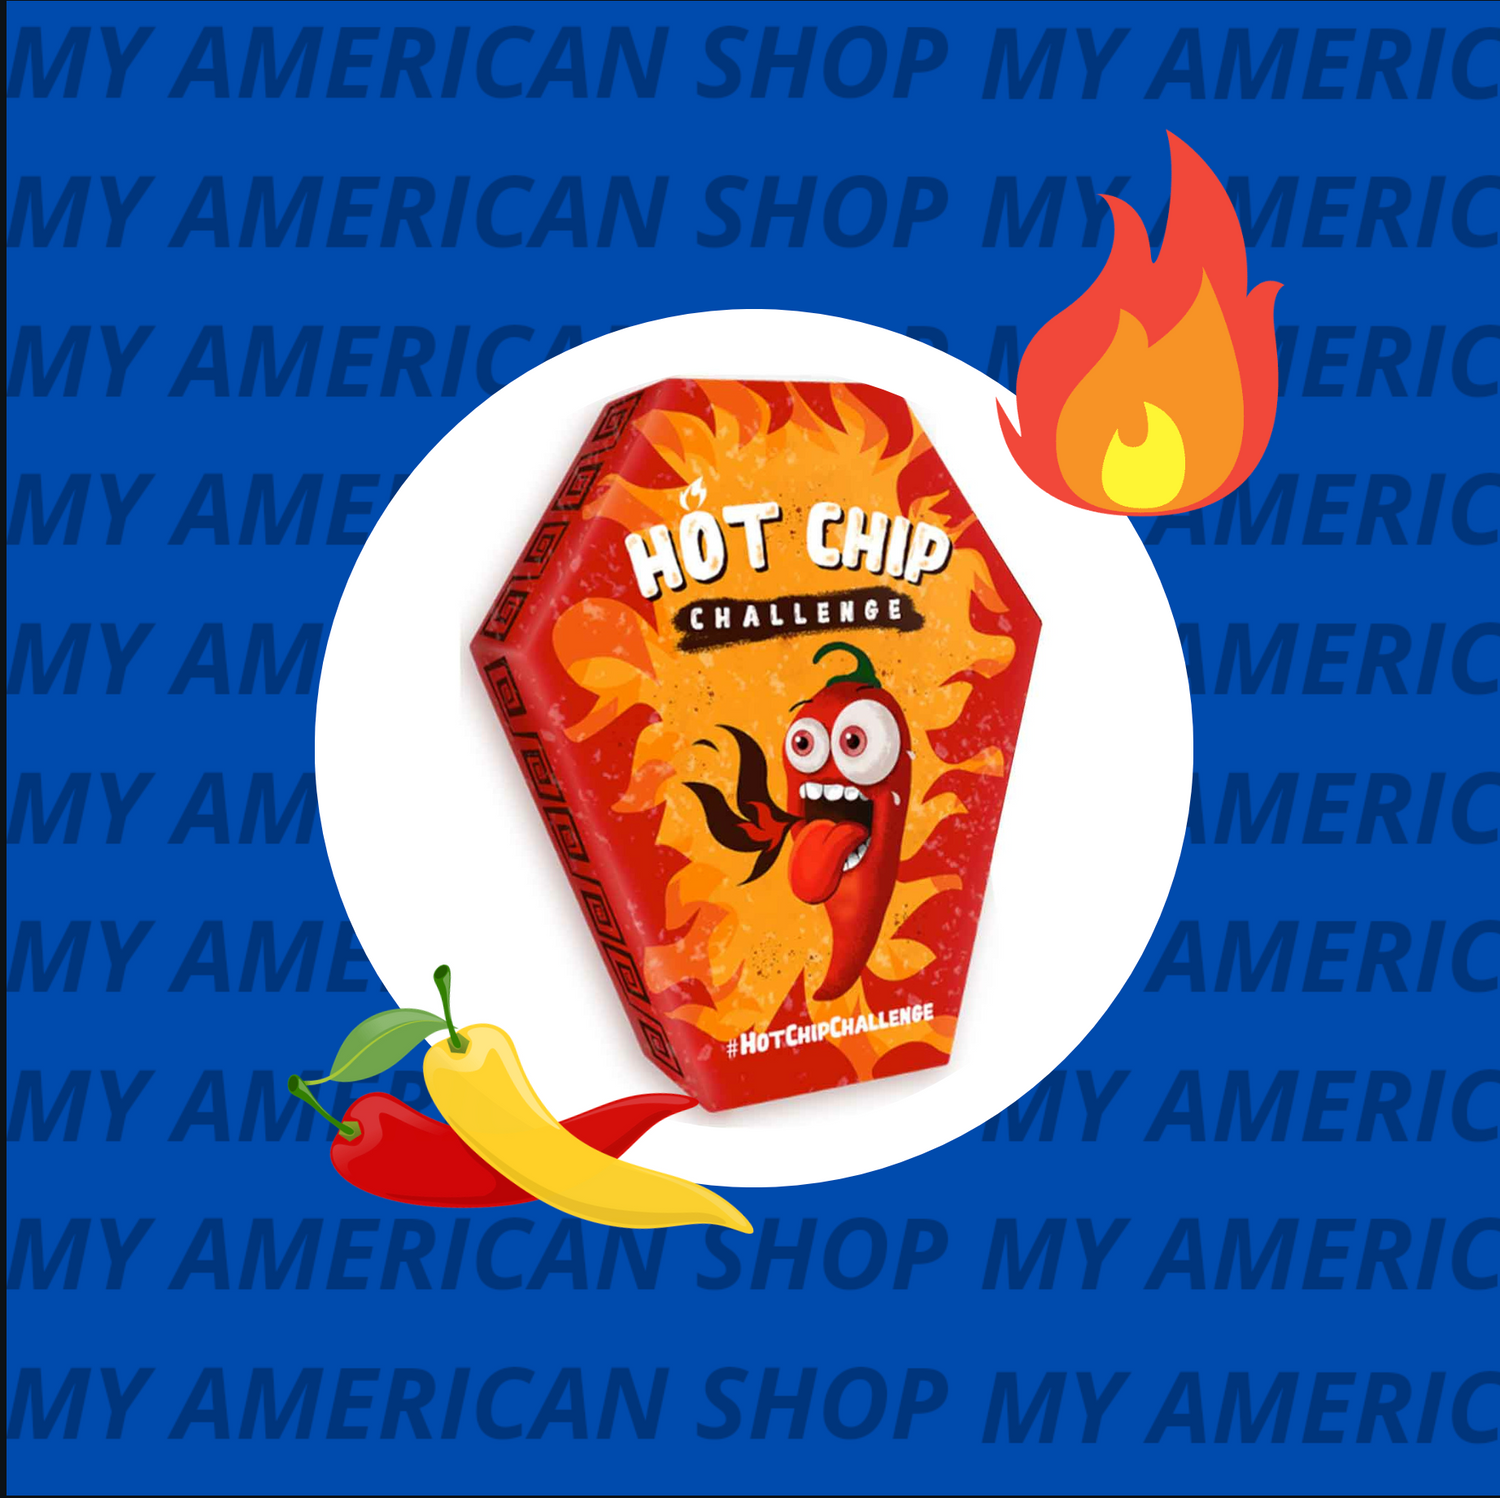 Hot Chip Challenge - My American Shop